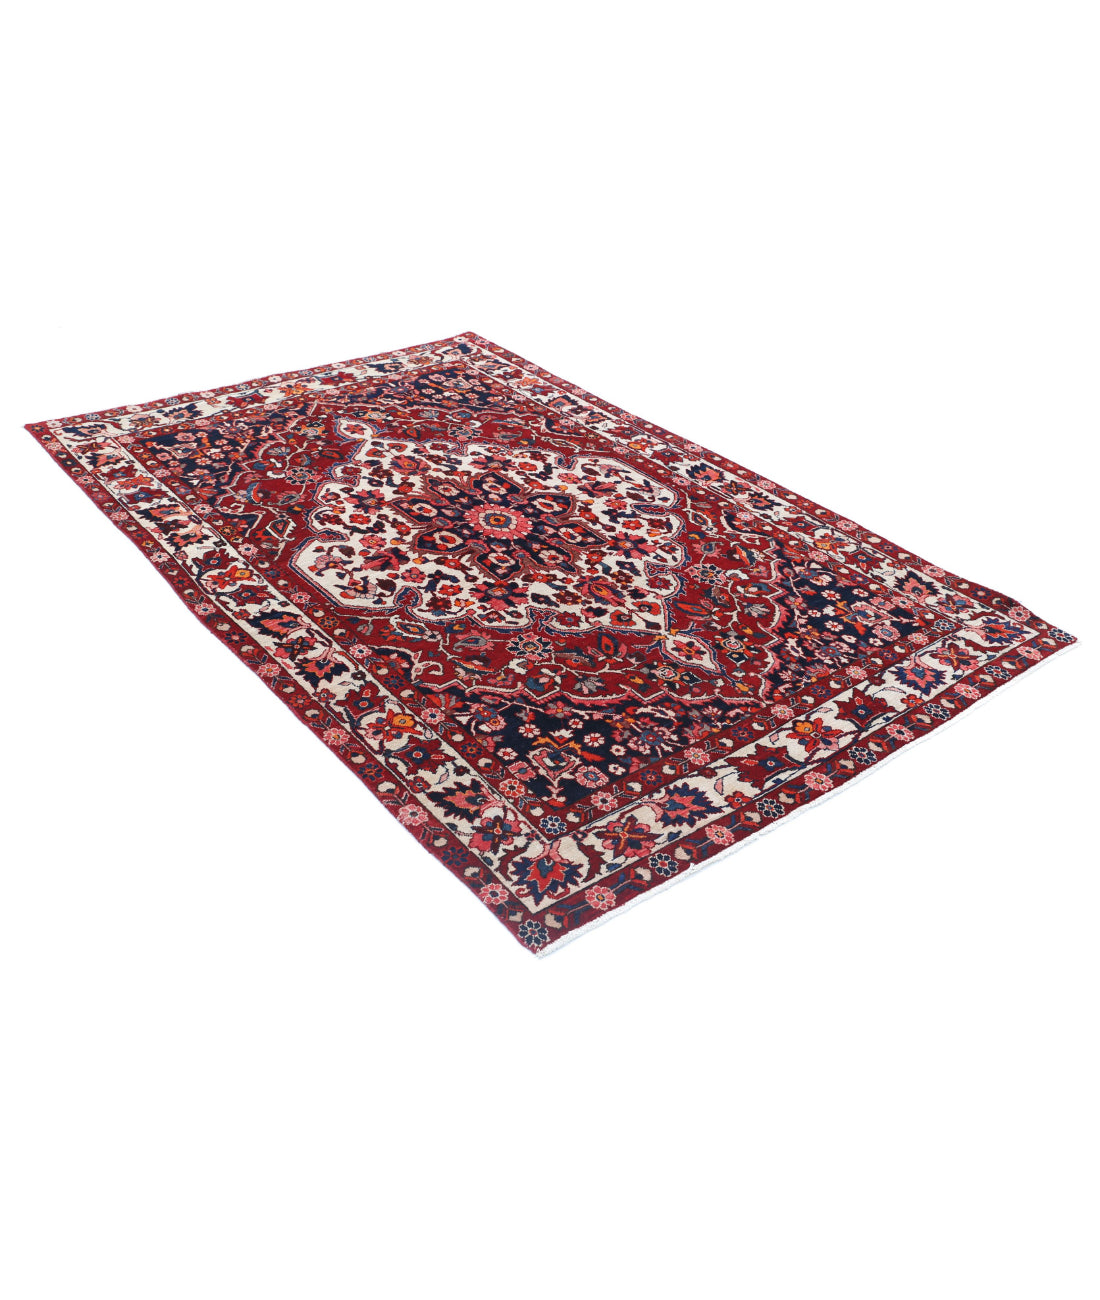 Hand Knotted Persian Bakhtiari Wool Rug - 5'3'' x 8'1'' 5'3'' x 8'1'' (158 X 243) / Red / Ivory